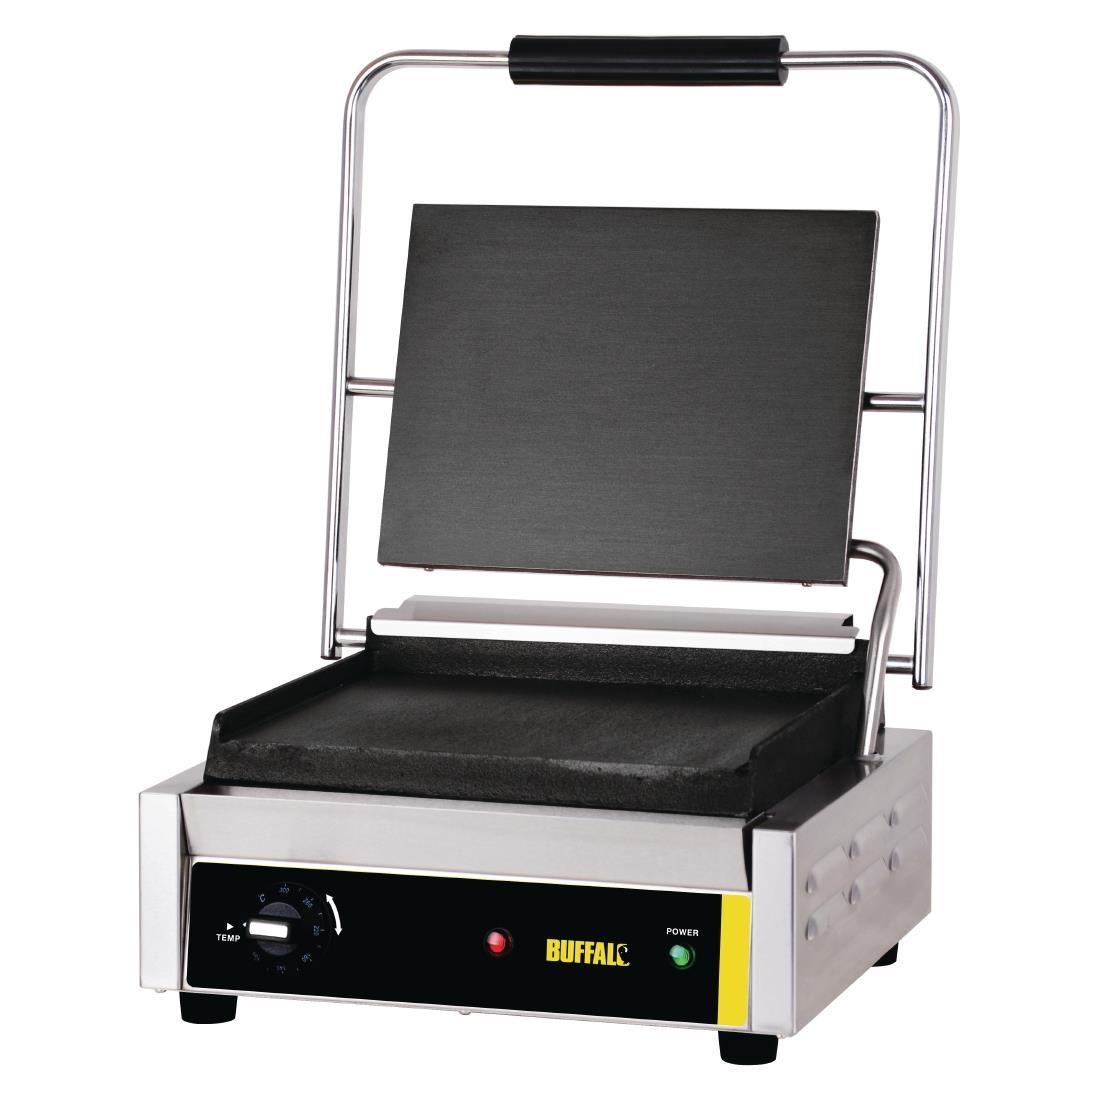 Buffalo Bistro Contact Grill Large Flat - GJ455  - 2